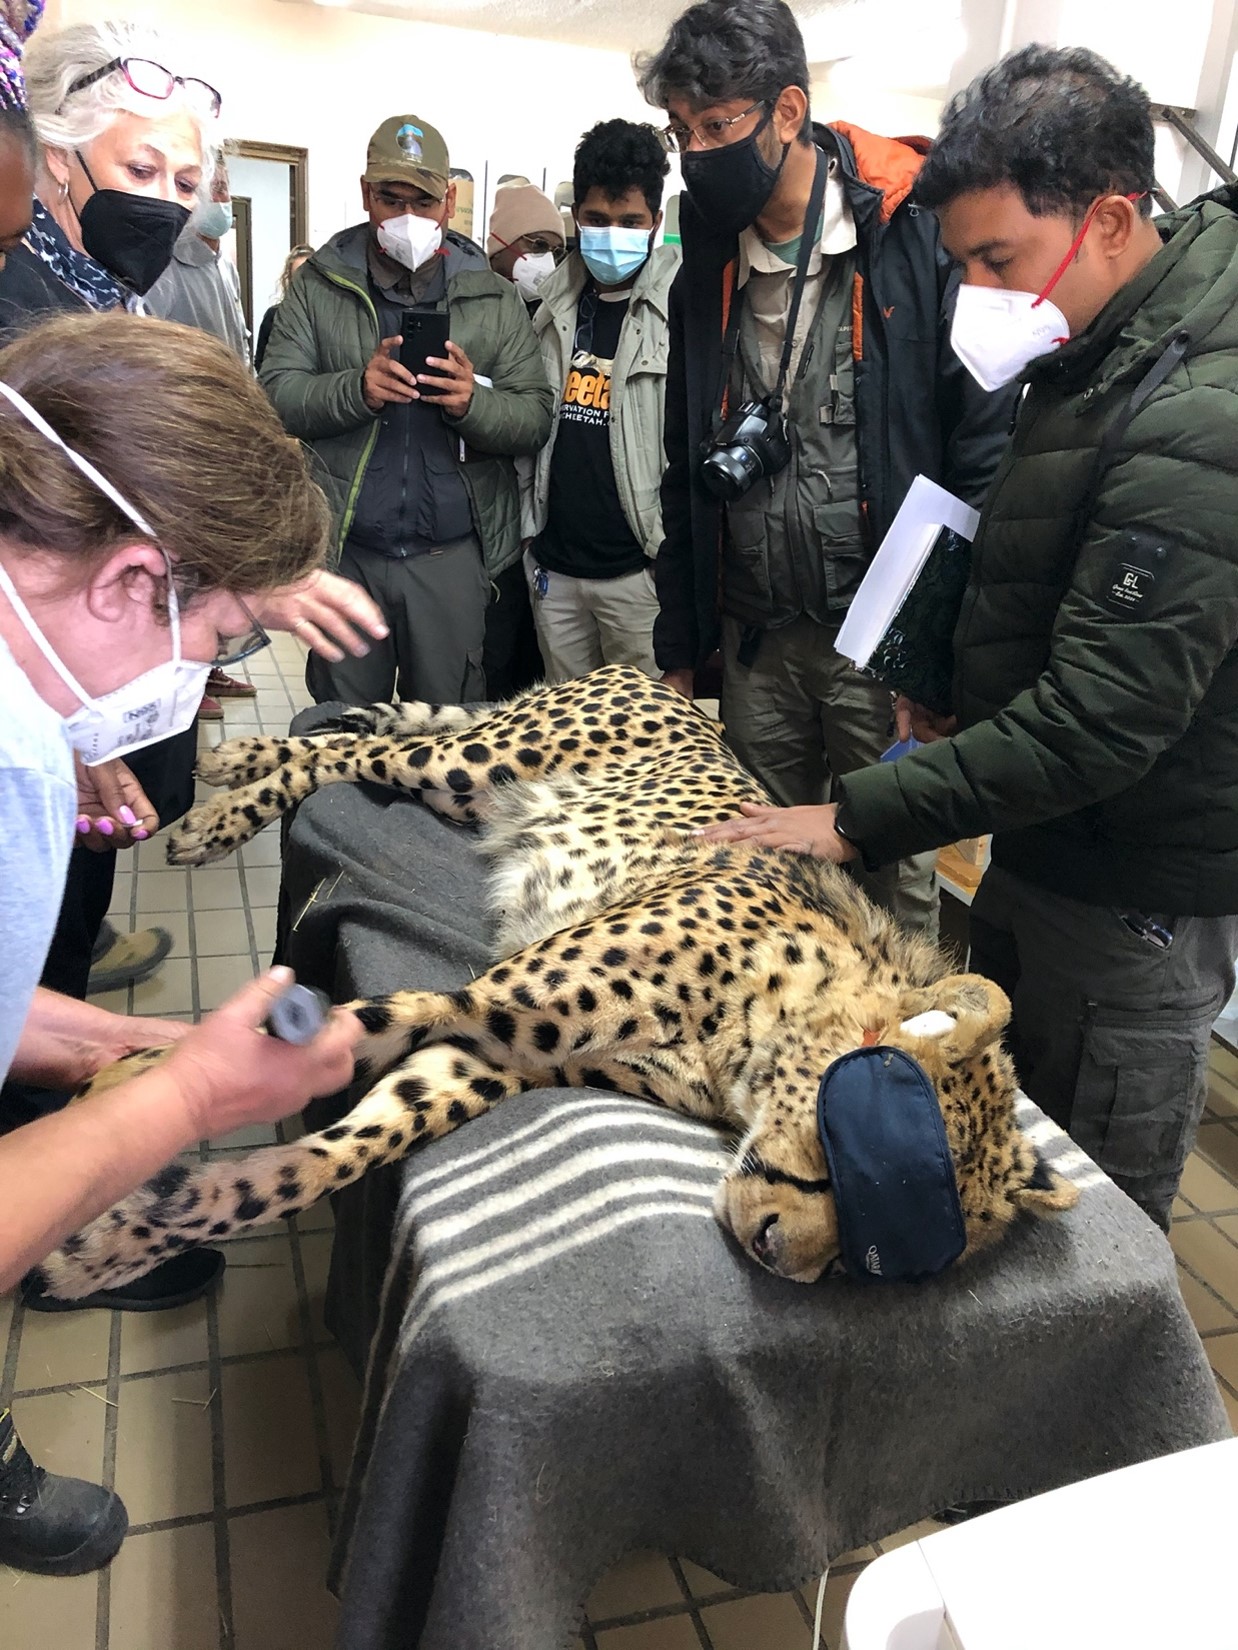 Sarah Abdelmessih examining a sedated wild cheetah with a group from India.